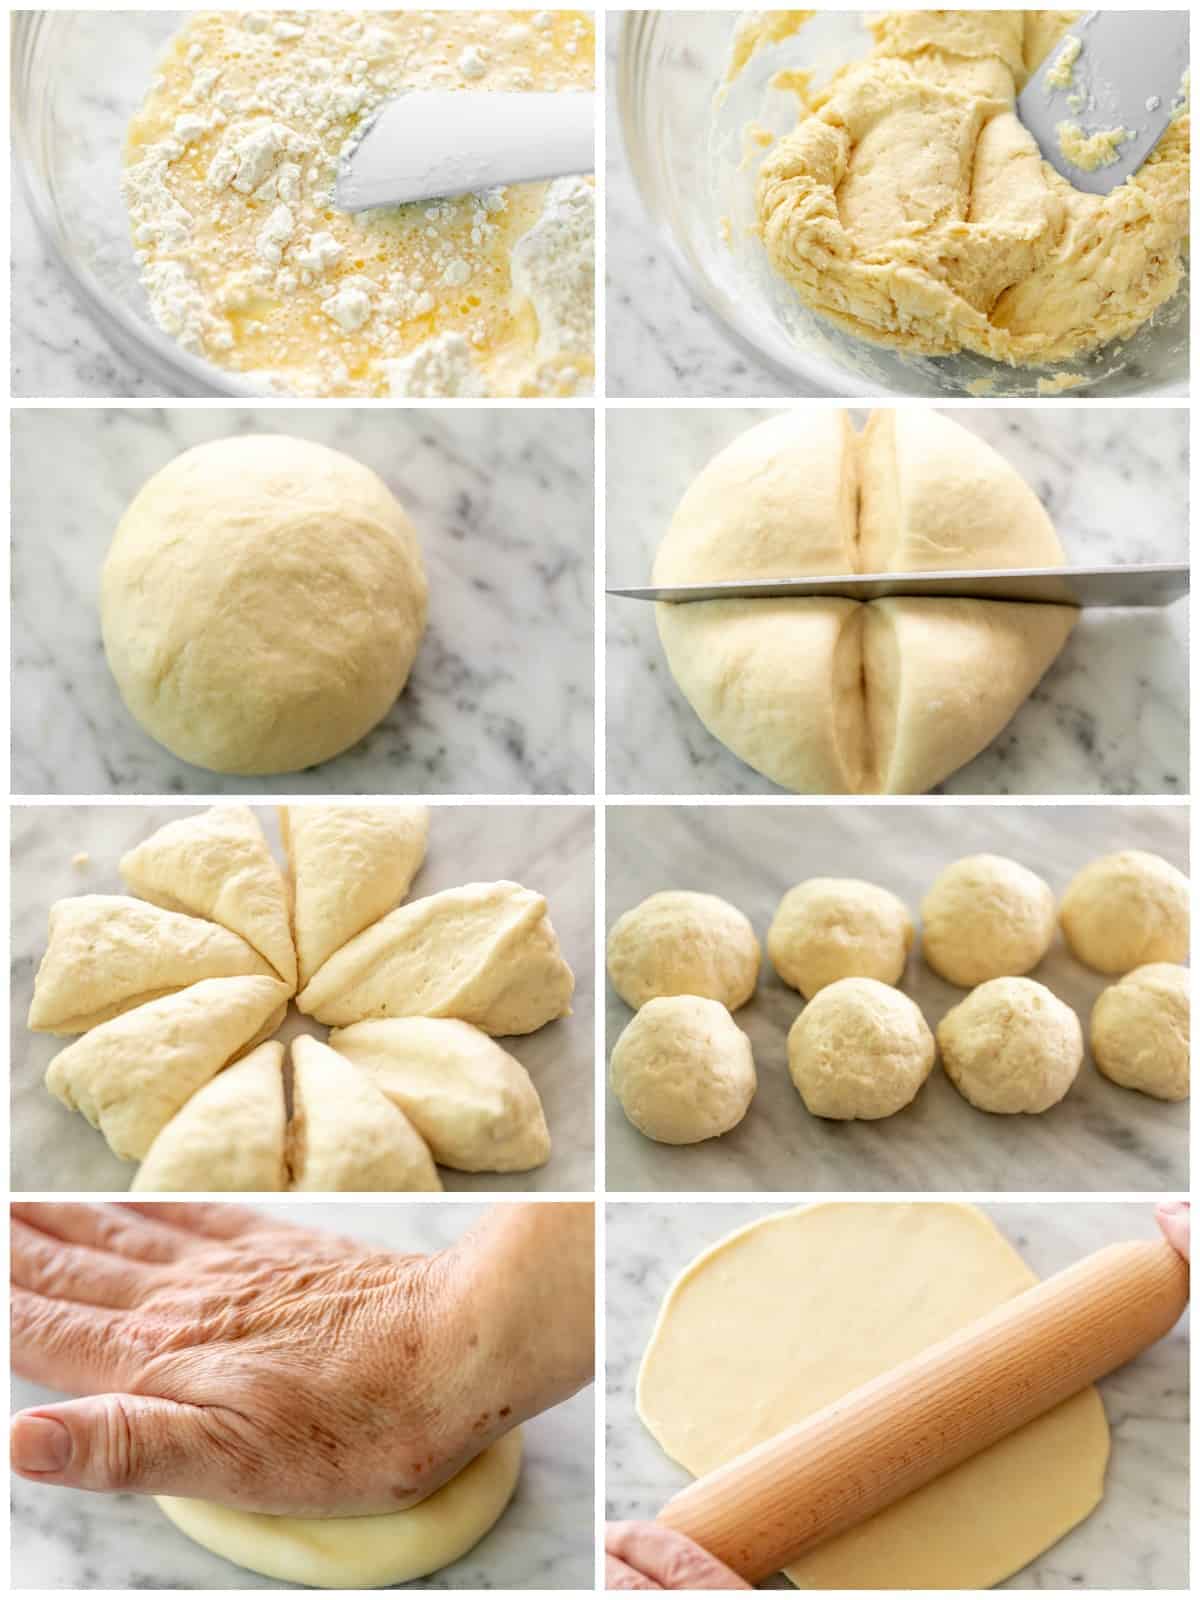 How To Make Flour Tortillas in a Collage | cafedelites.com